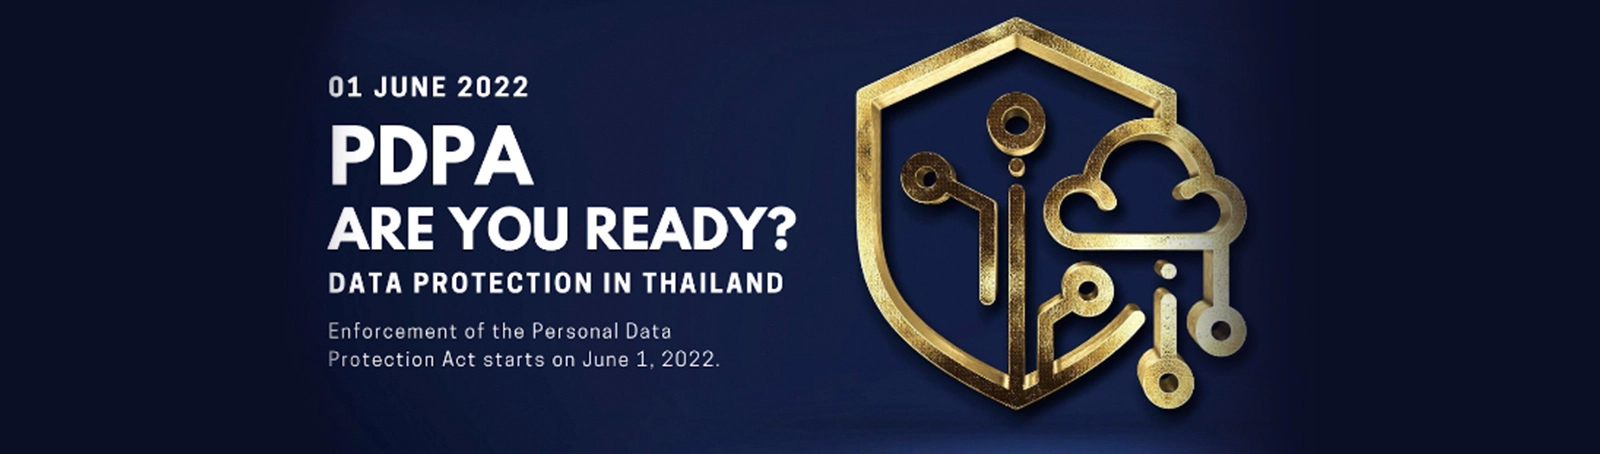 Data Protection and PDPA in Thailand